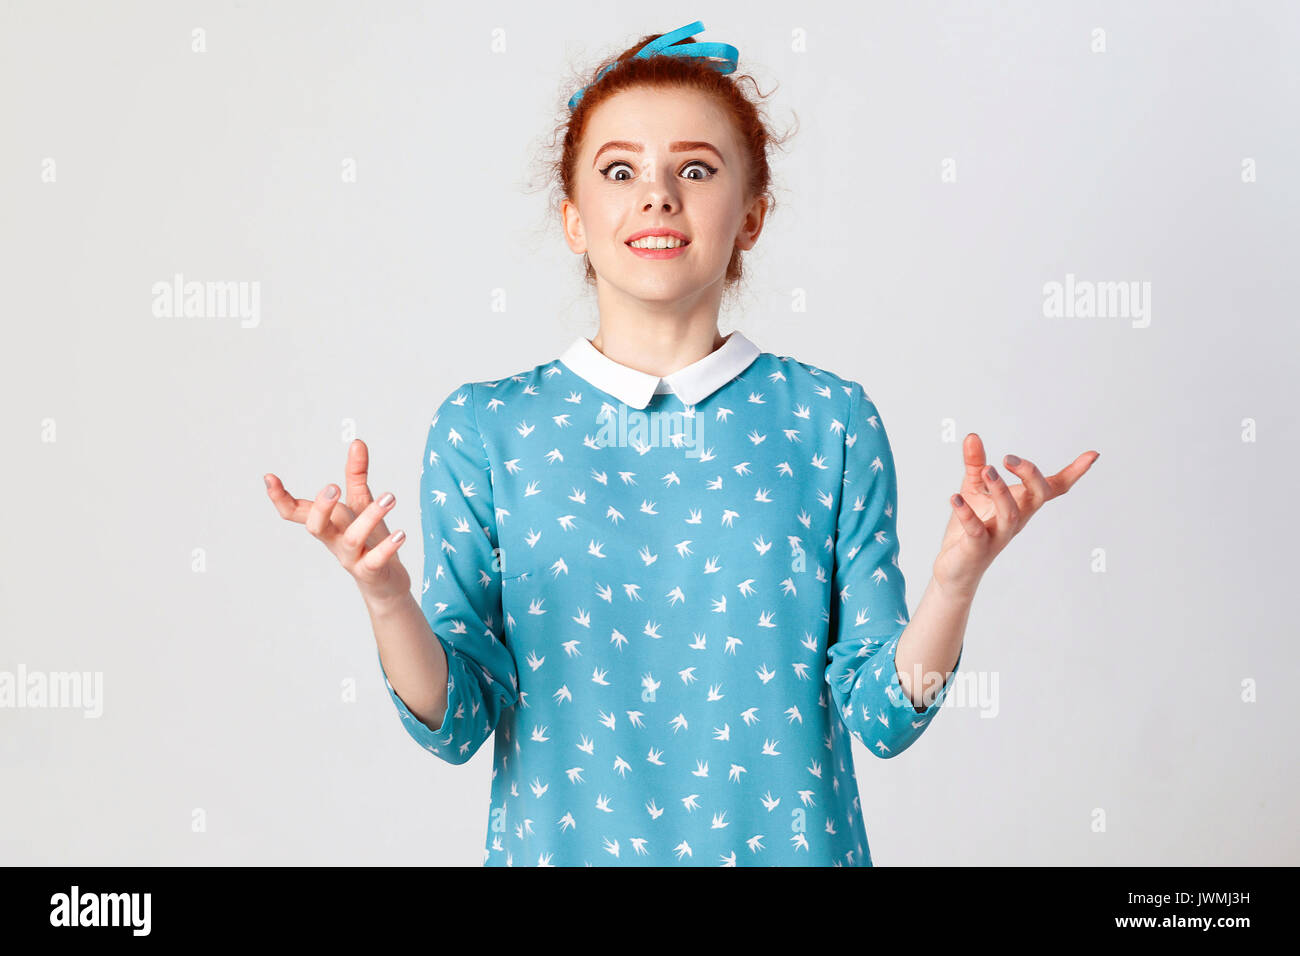 Body language. The young surprised and astonished caucasian girl gesturing in full disbelief, shrugging her shoulders, having shocked expression, open Stock Photo